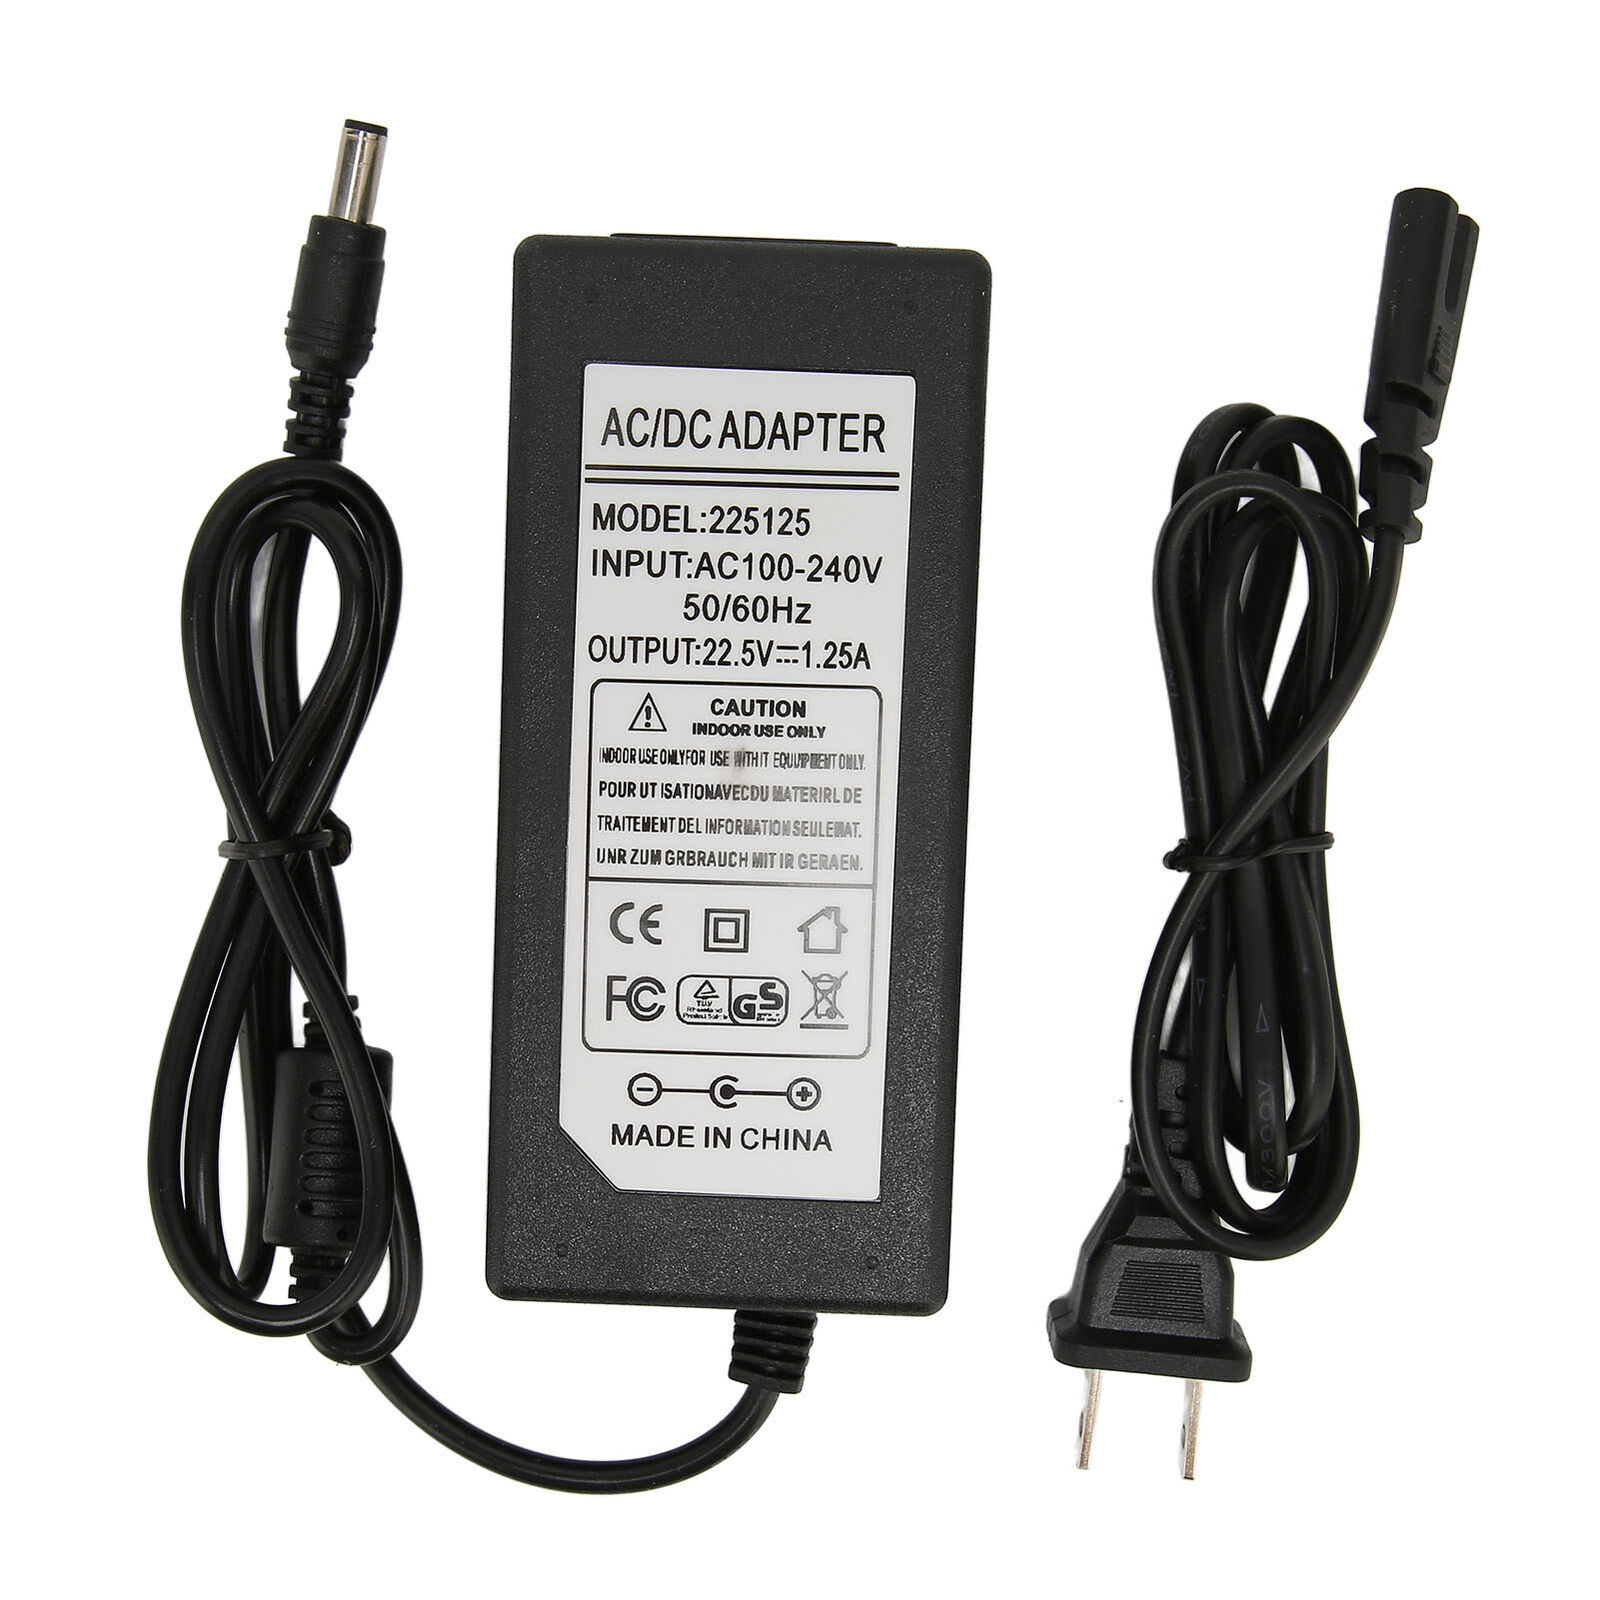 Adapter Charger Power Supply For Robot Power Supply Cleaner Equipment Brand: Unbranded Input Vol